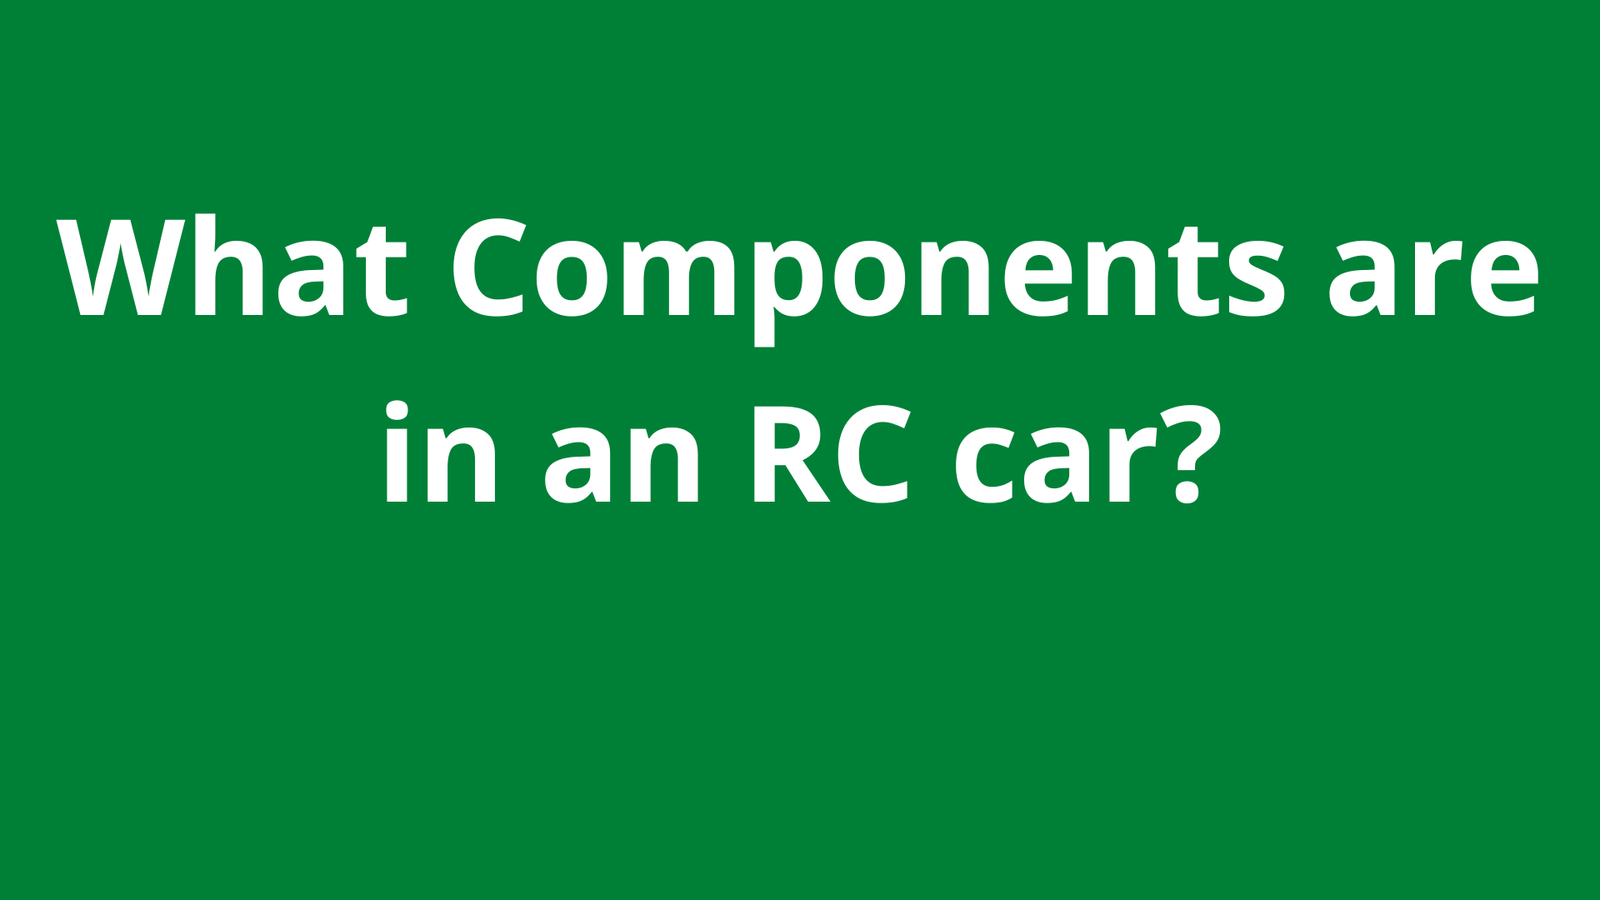 What Components are in an RC car?